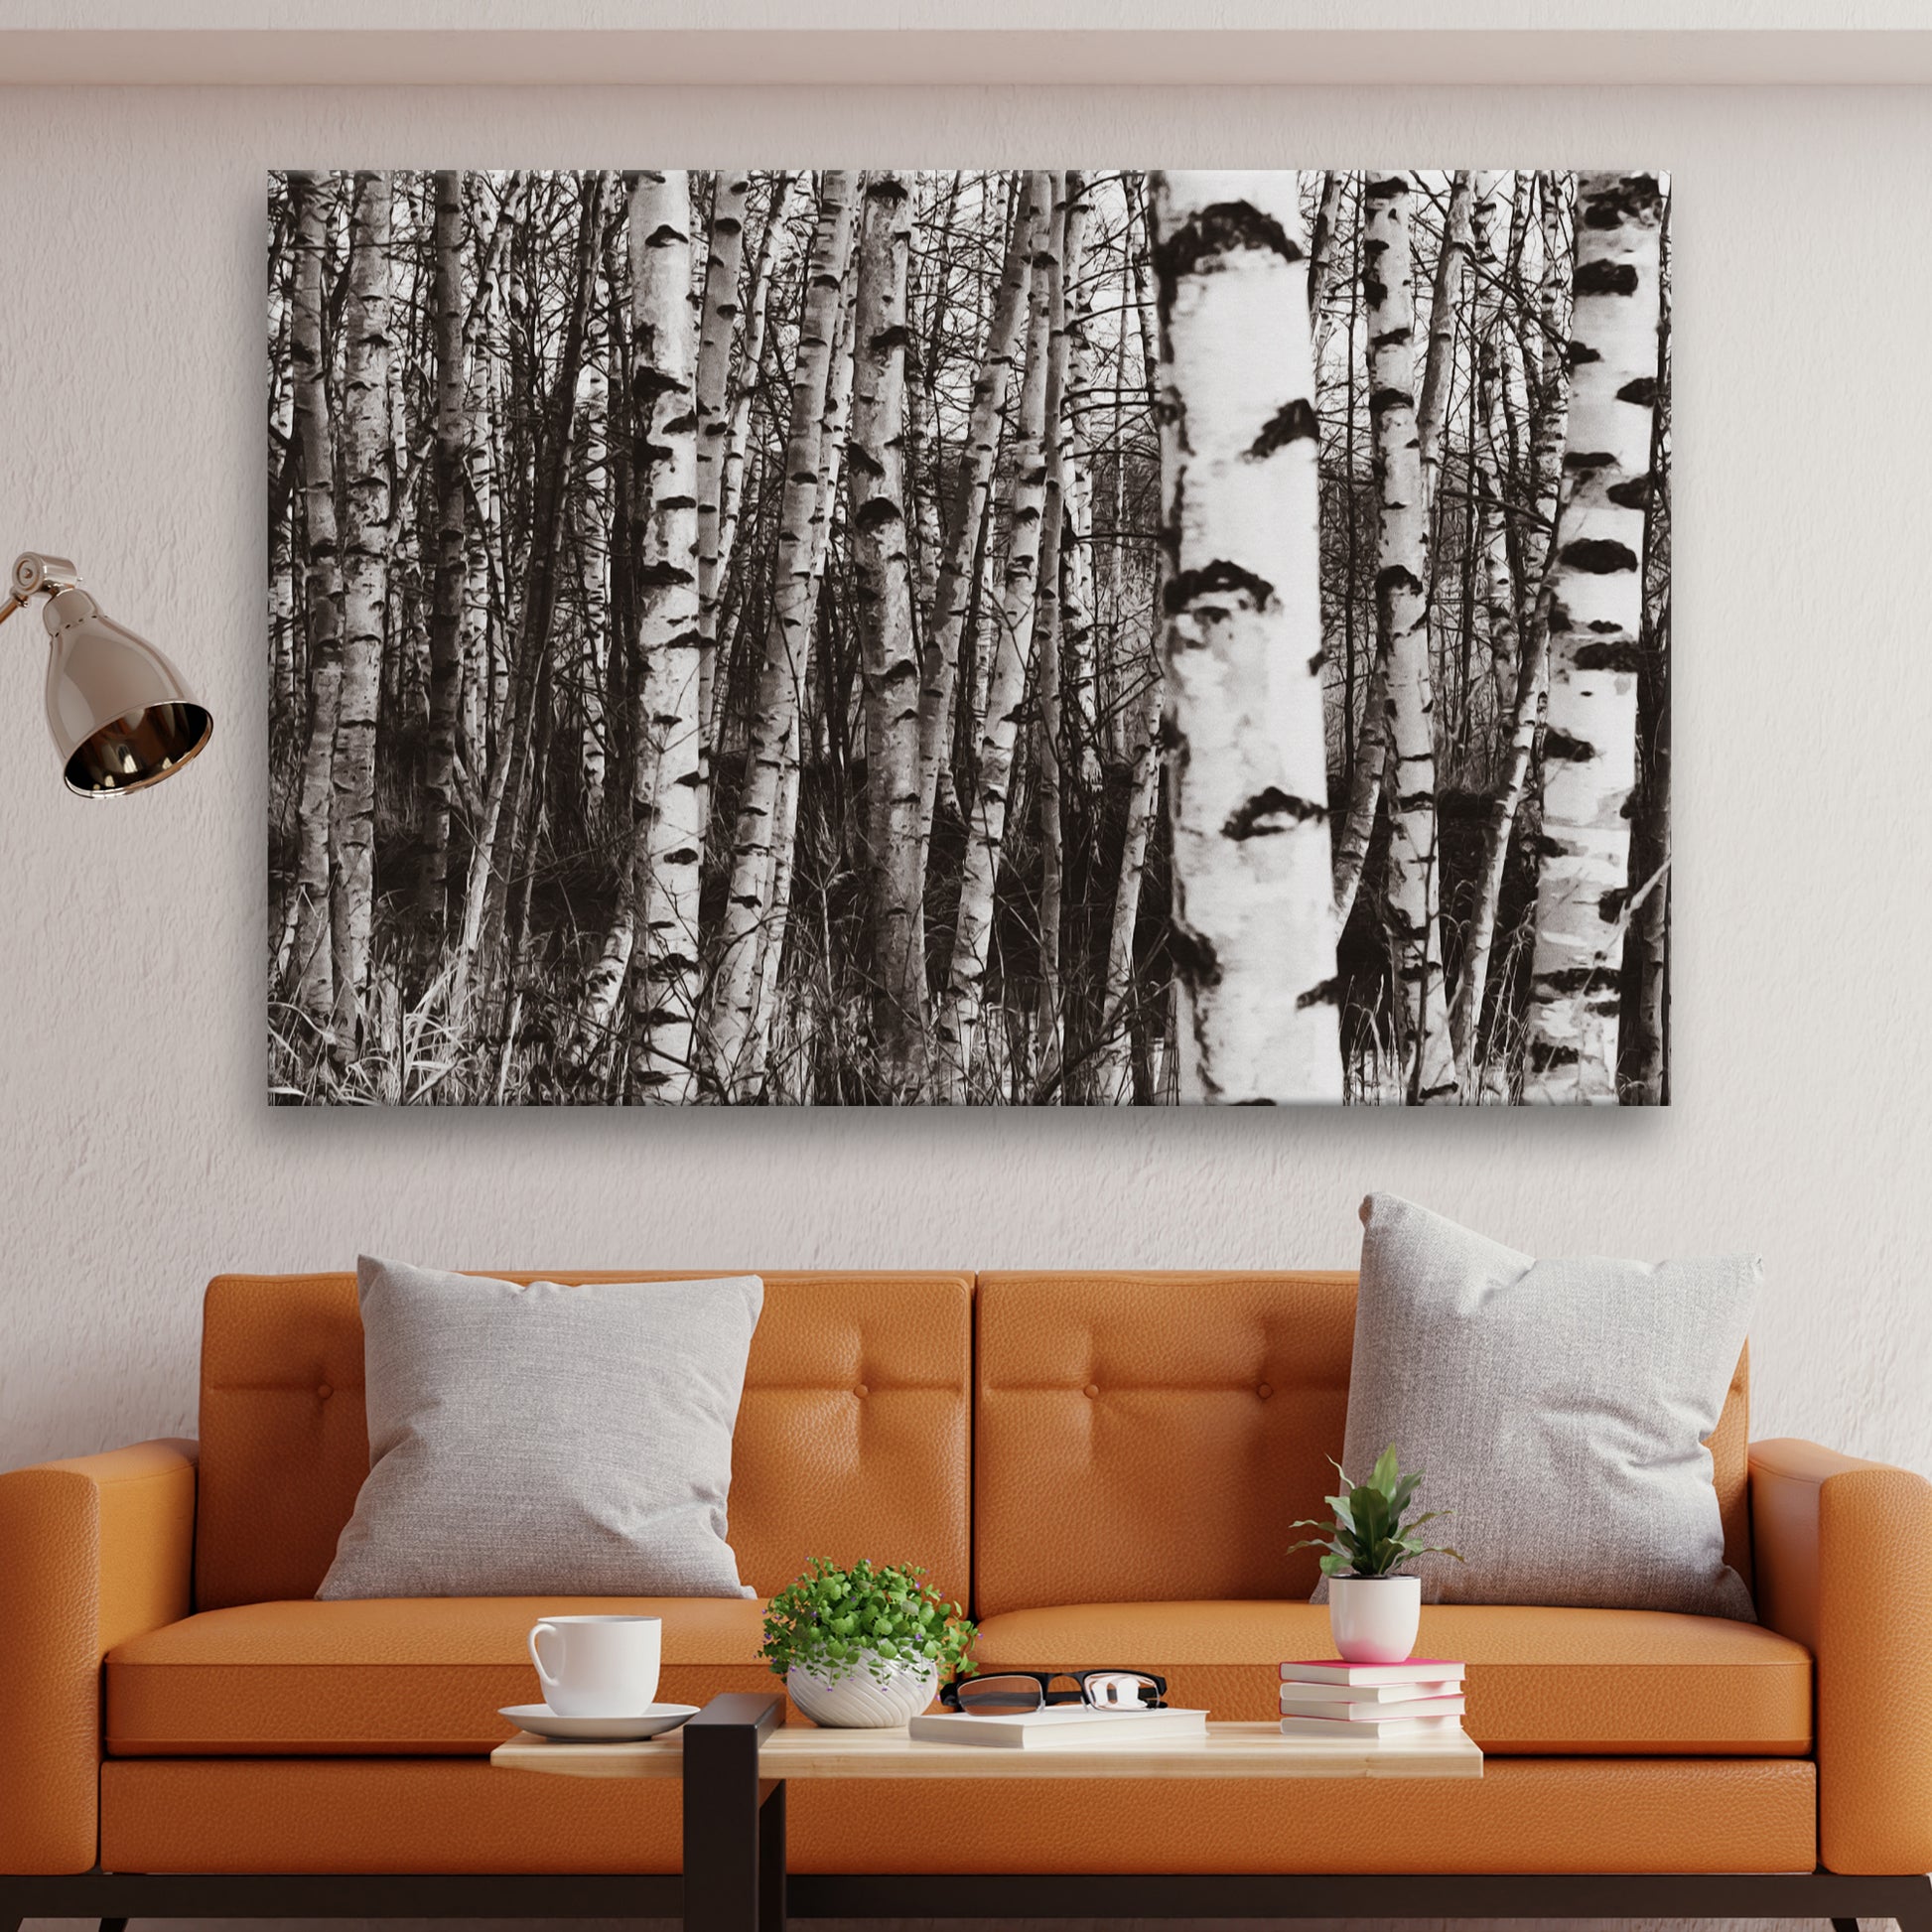 Grayscale Birch Tree Trunks Canvas Wall Art - Image by Tailored Canvases